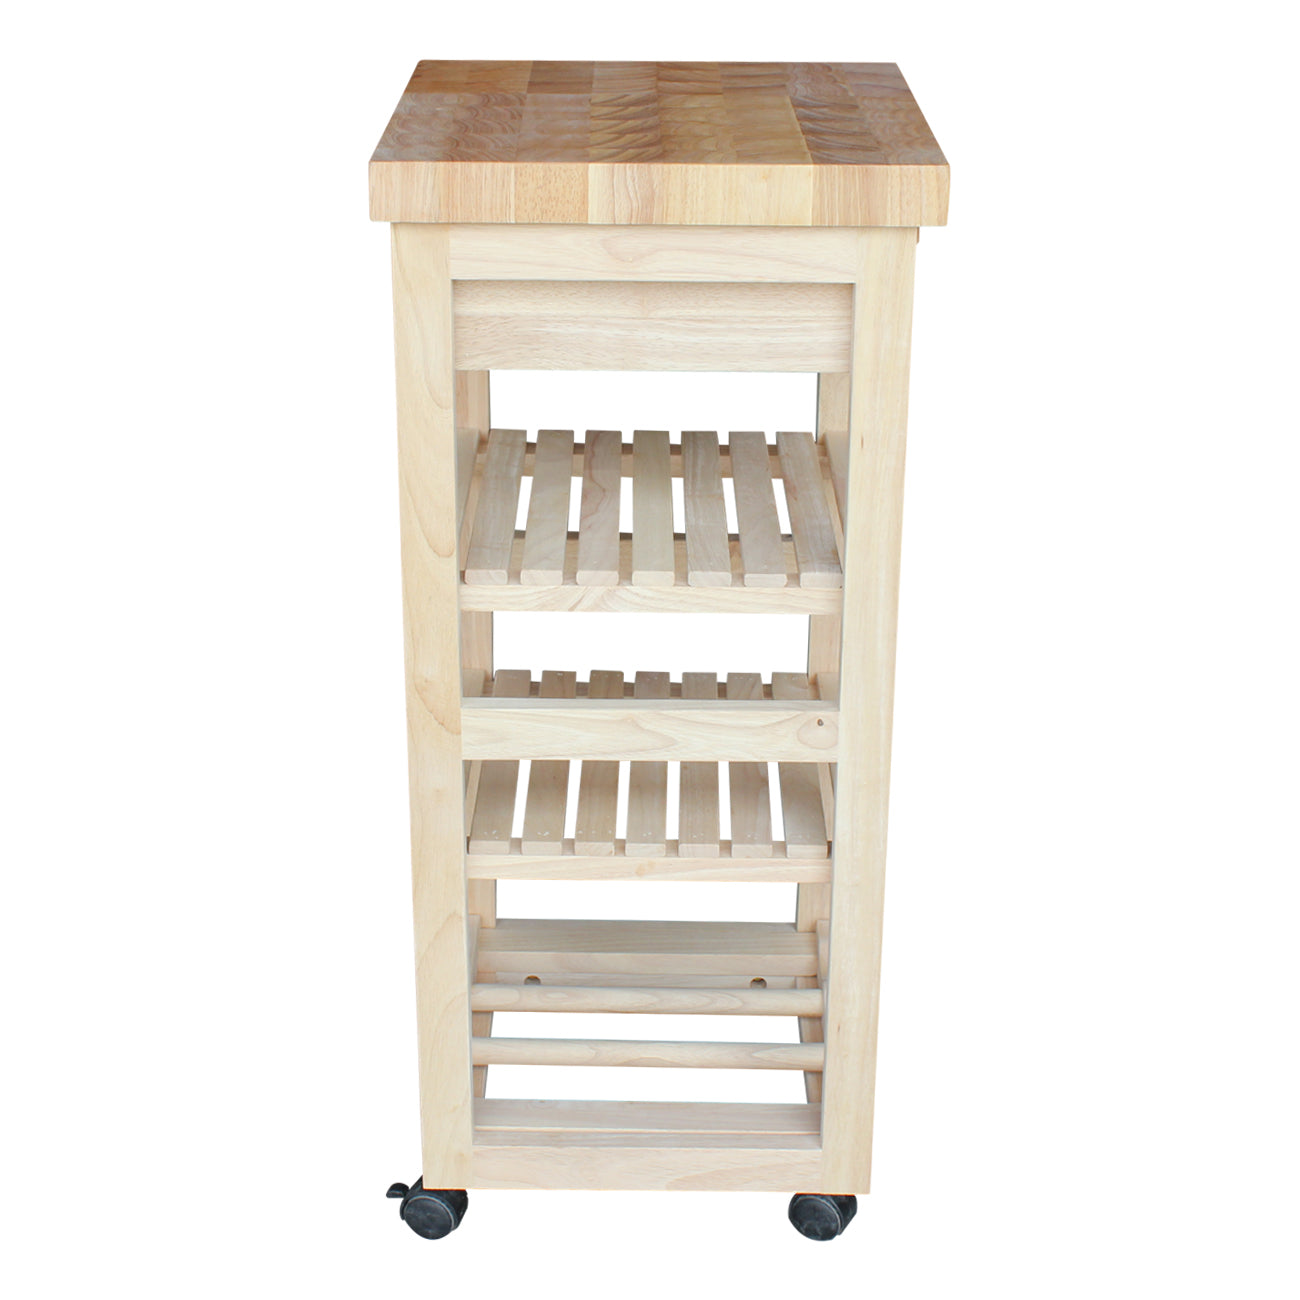 International Concepts Unfinished Kitchen Cart Trolley